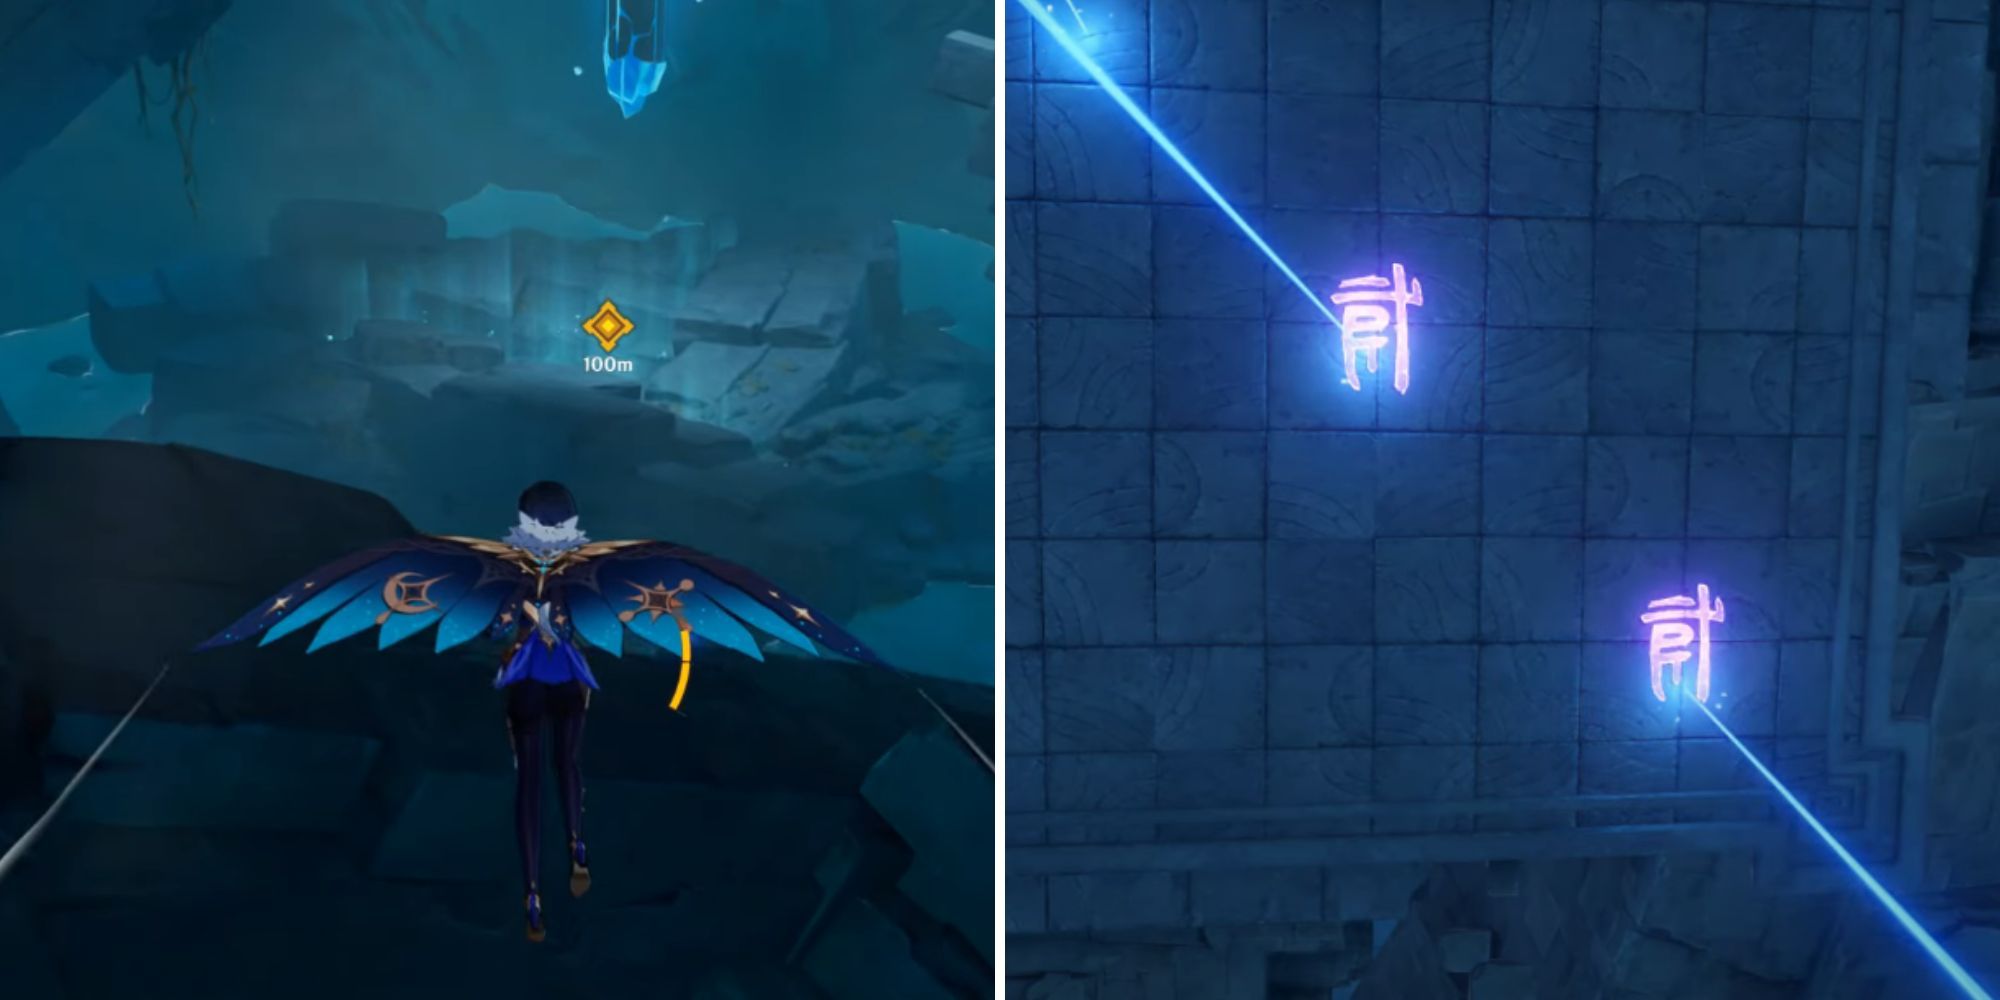 A collage showing a character flying on the left and two symbols on a wall on the right.